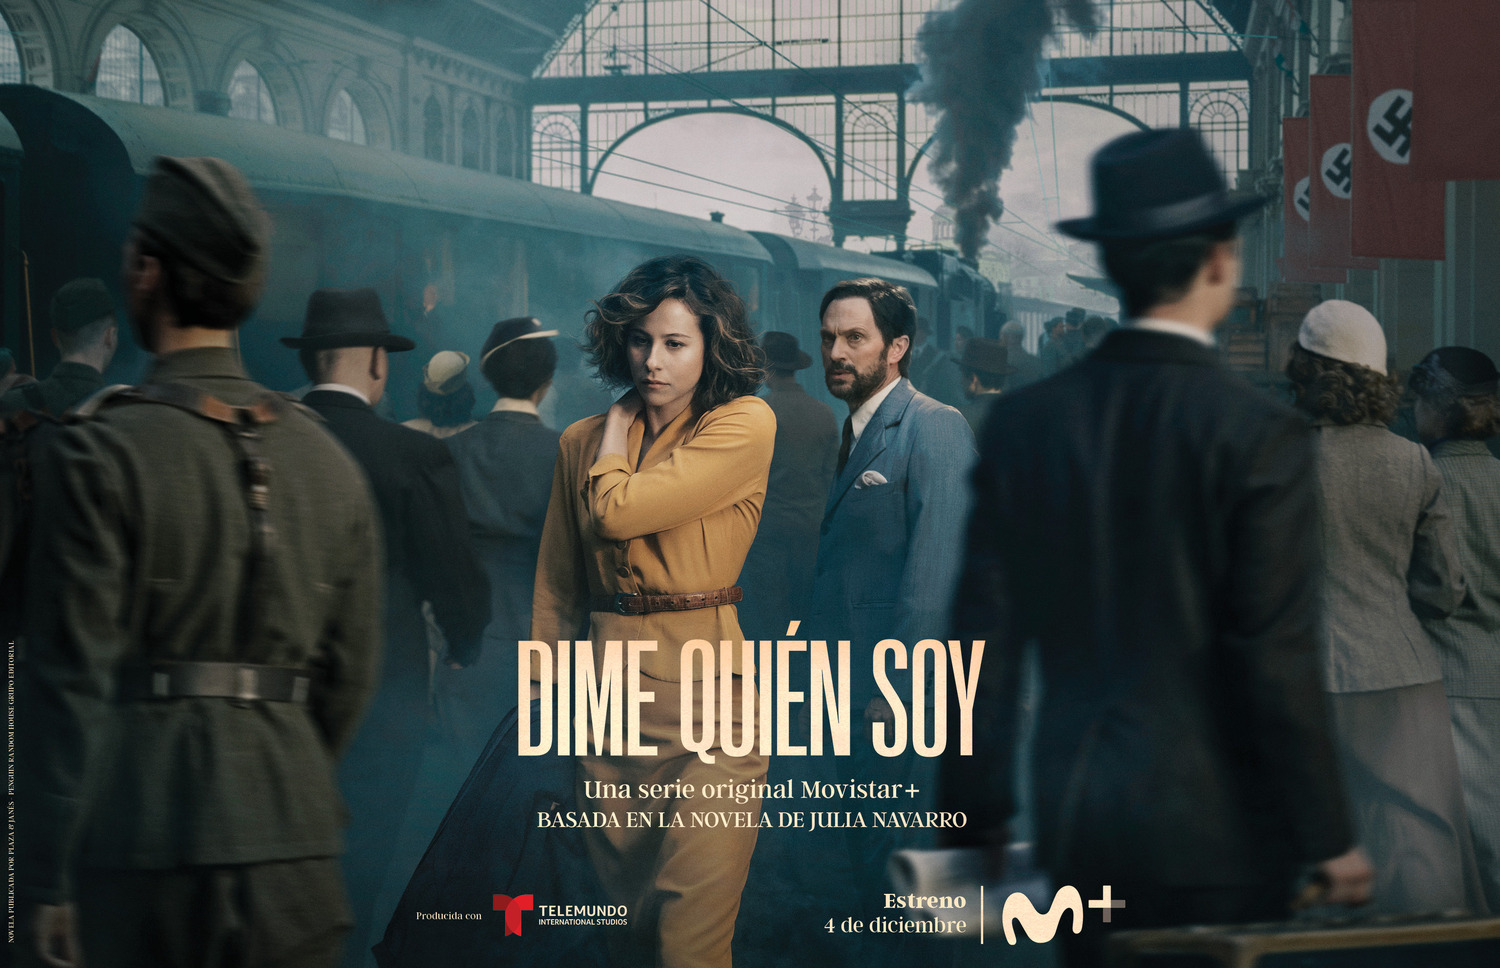 Extra Large TV Poster Image for Dime quién soy (#4 of 6)